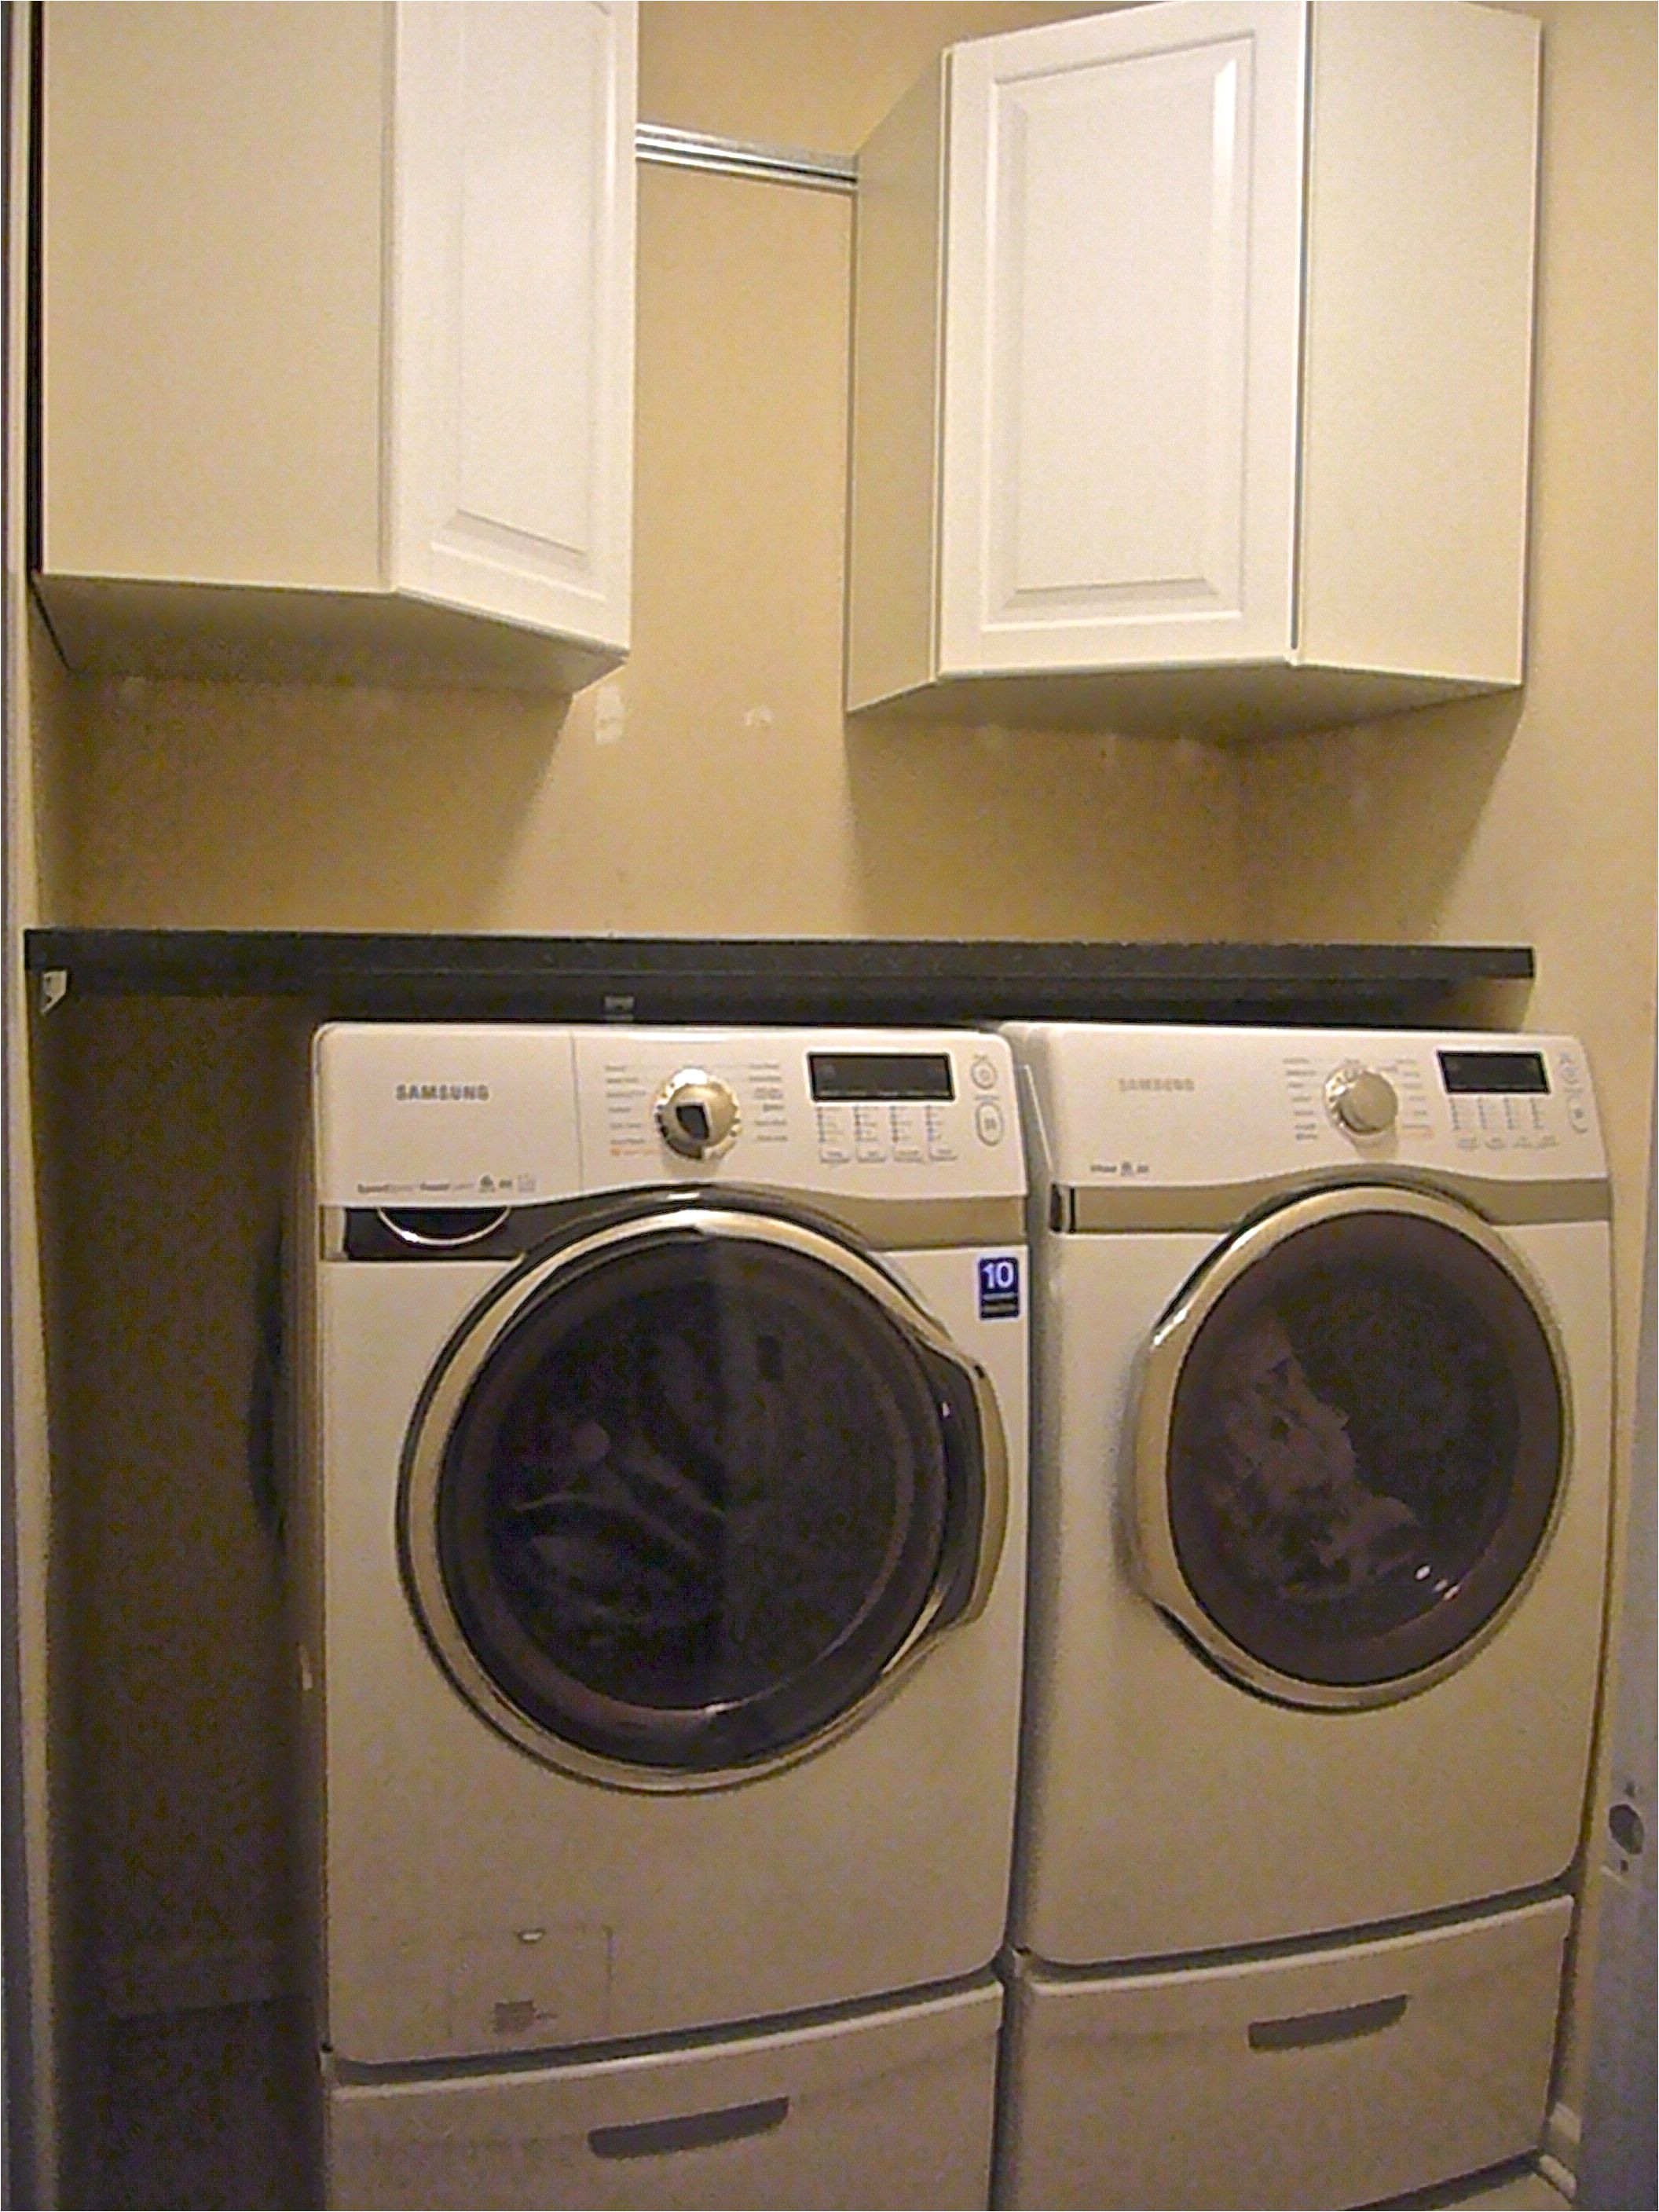 Ikea Pedestal for Washer and Dryer I Didn T Want to Lose My Pedestal Storage and I Like My Machines Up